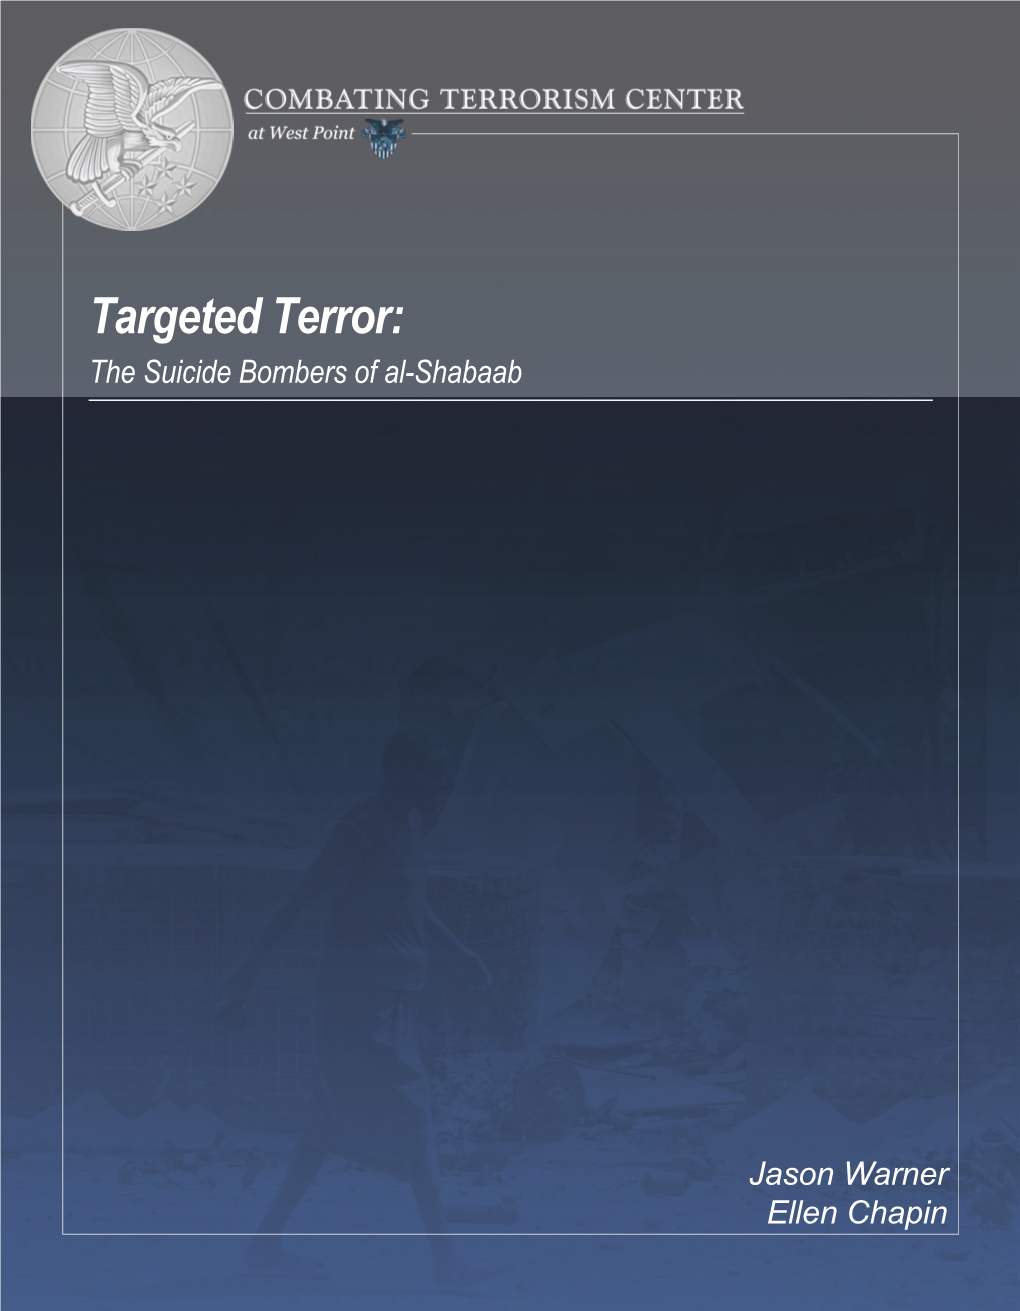 Targeted Terror: the Suicide Bombers of Al-Shabaab